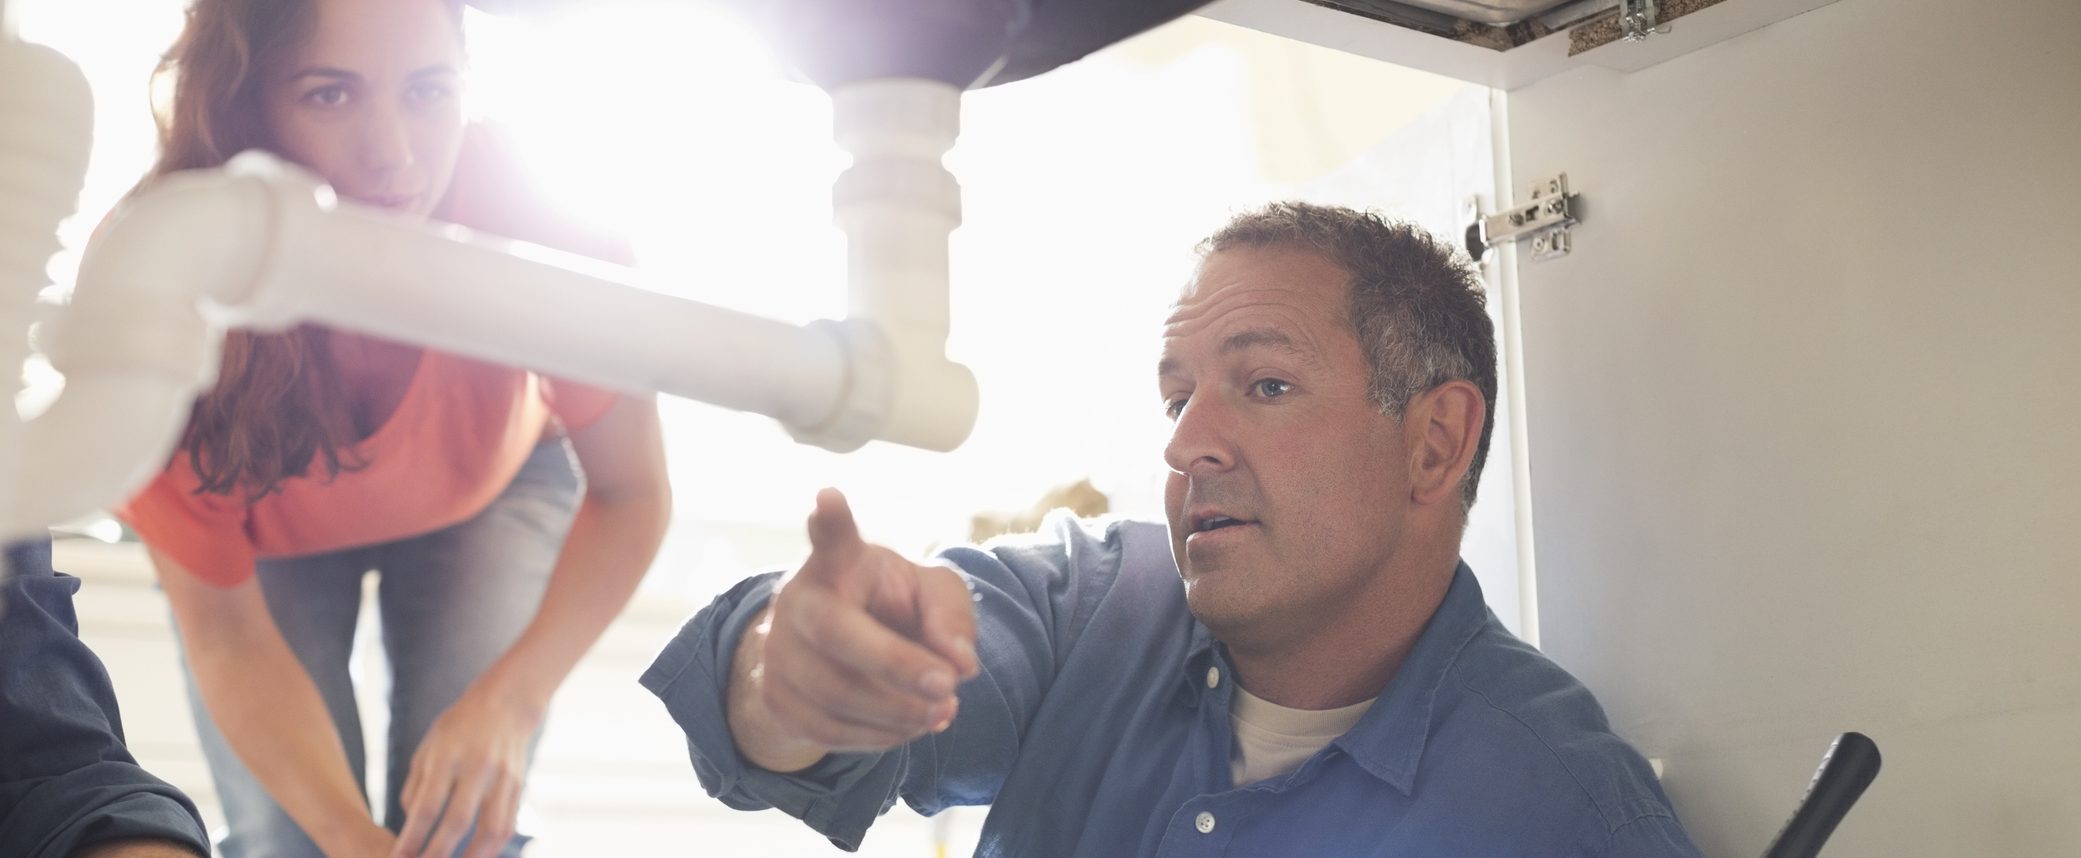 A home inspection is one of the costs associated with buying a home.